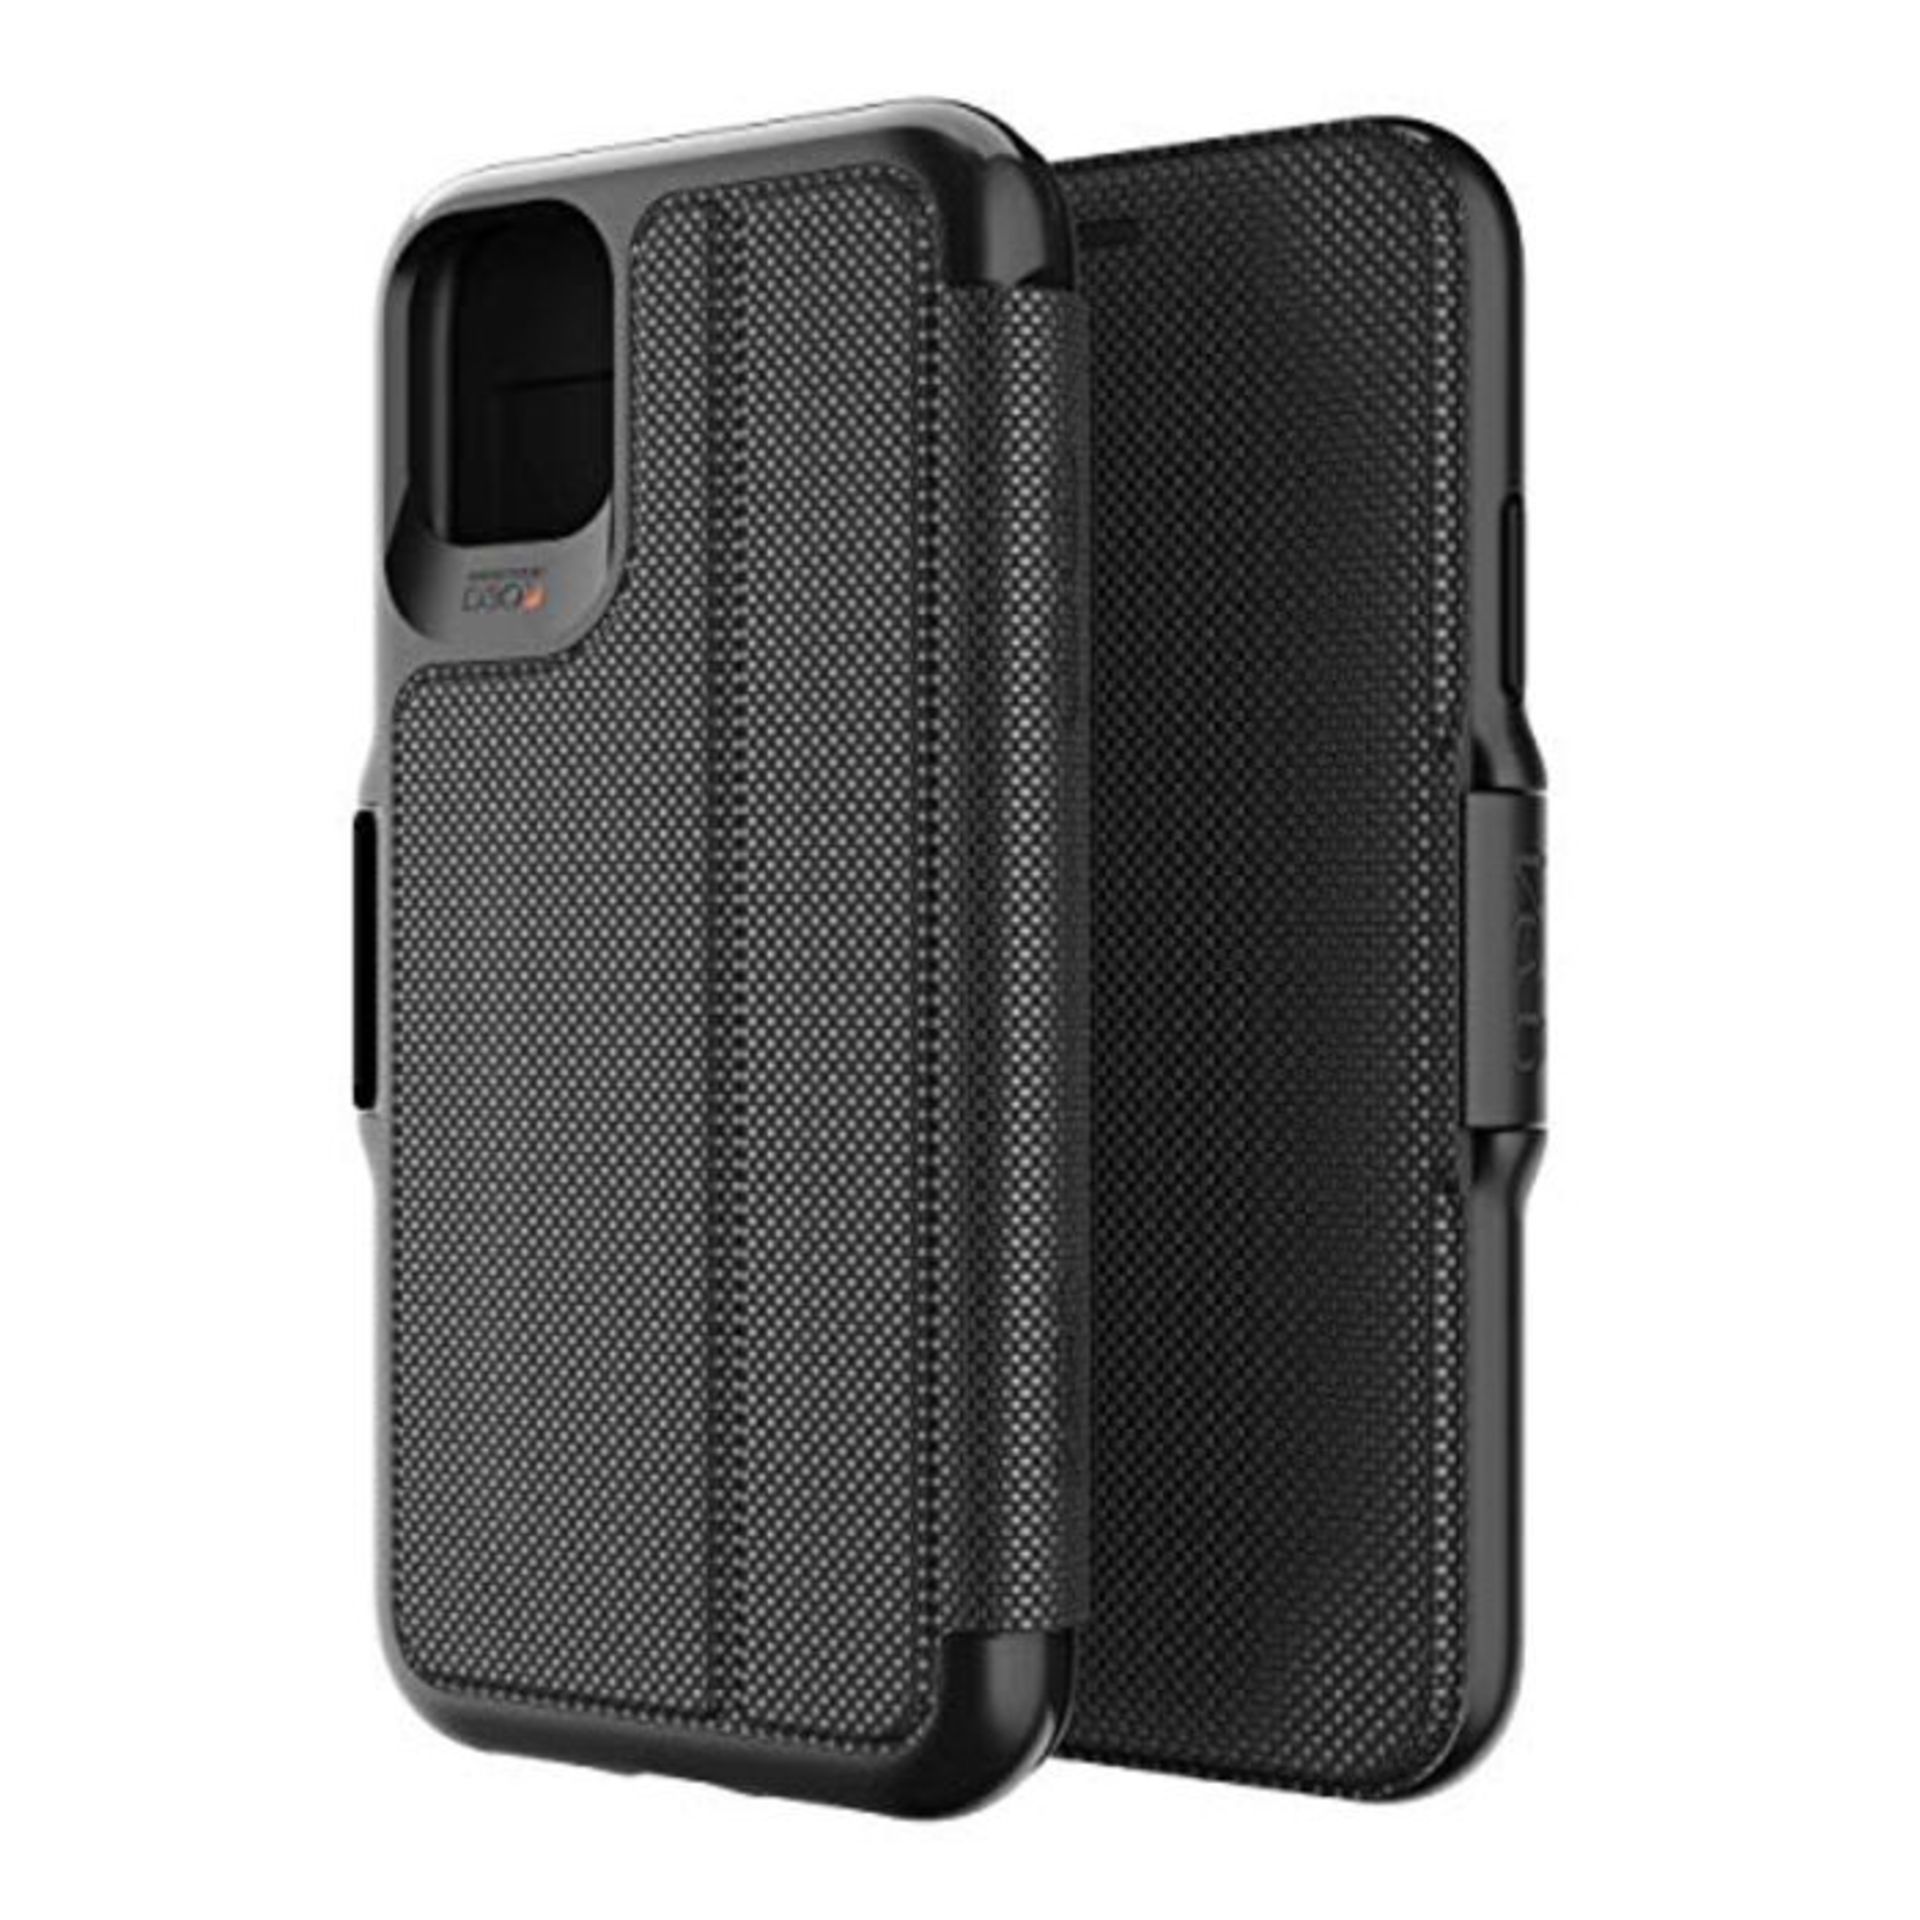 [CRACKED] GEAR4 Oxford Eco Folio Designed for iPhone 11 Pro Case, Recycled-Plastic Adv